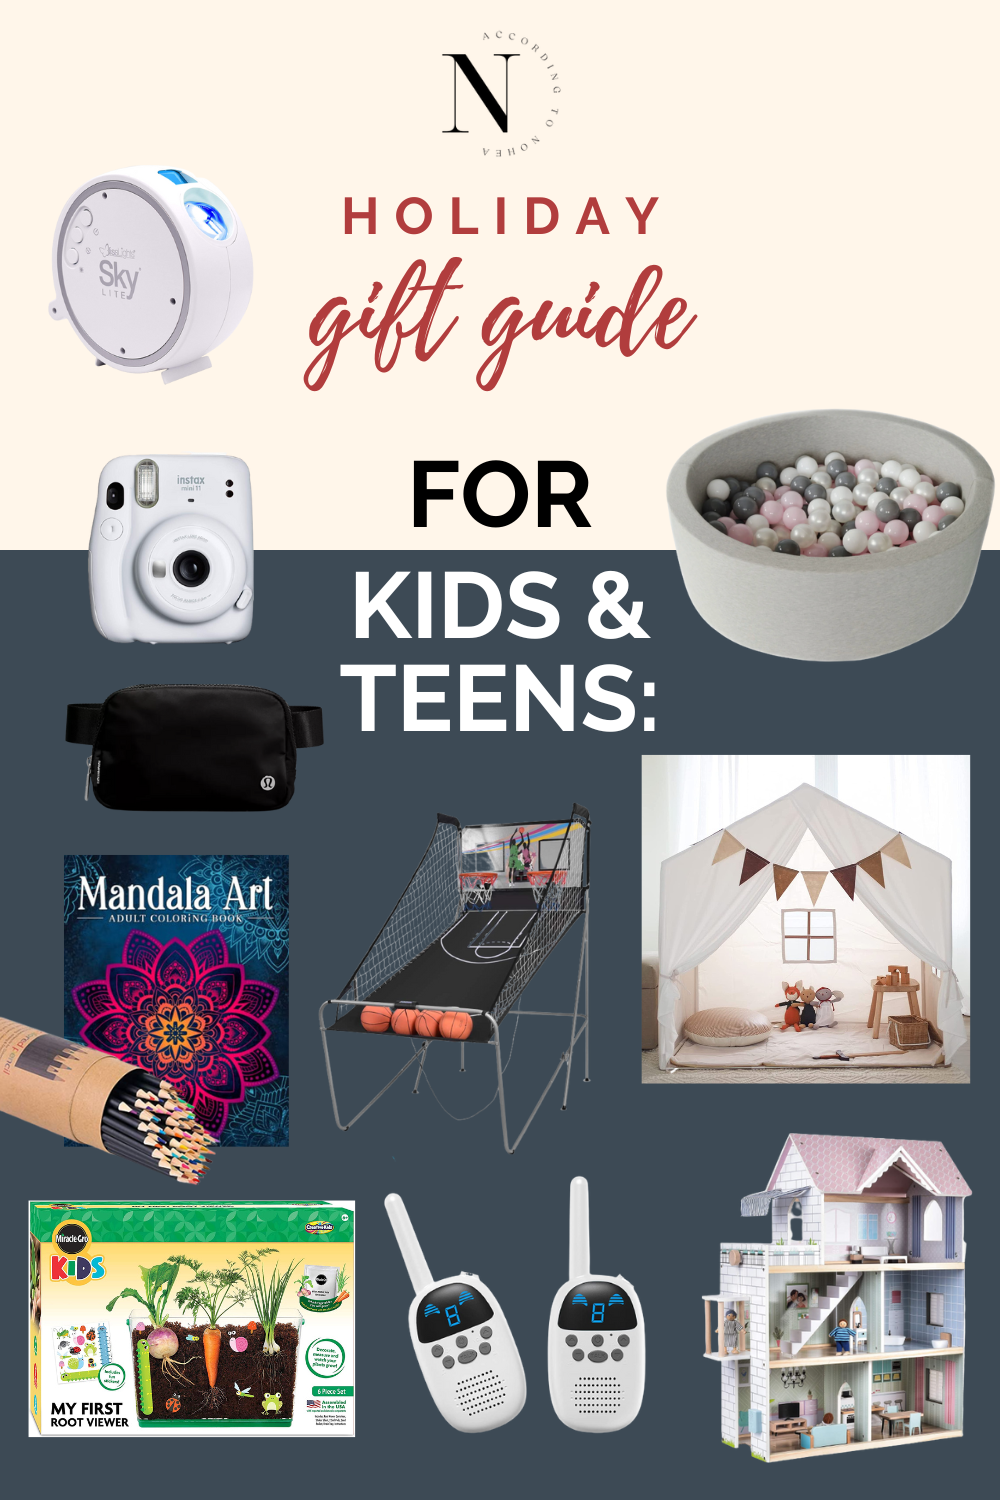 2022 Holiday Gift Guides – According to Nohea